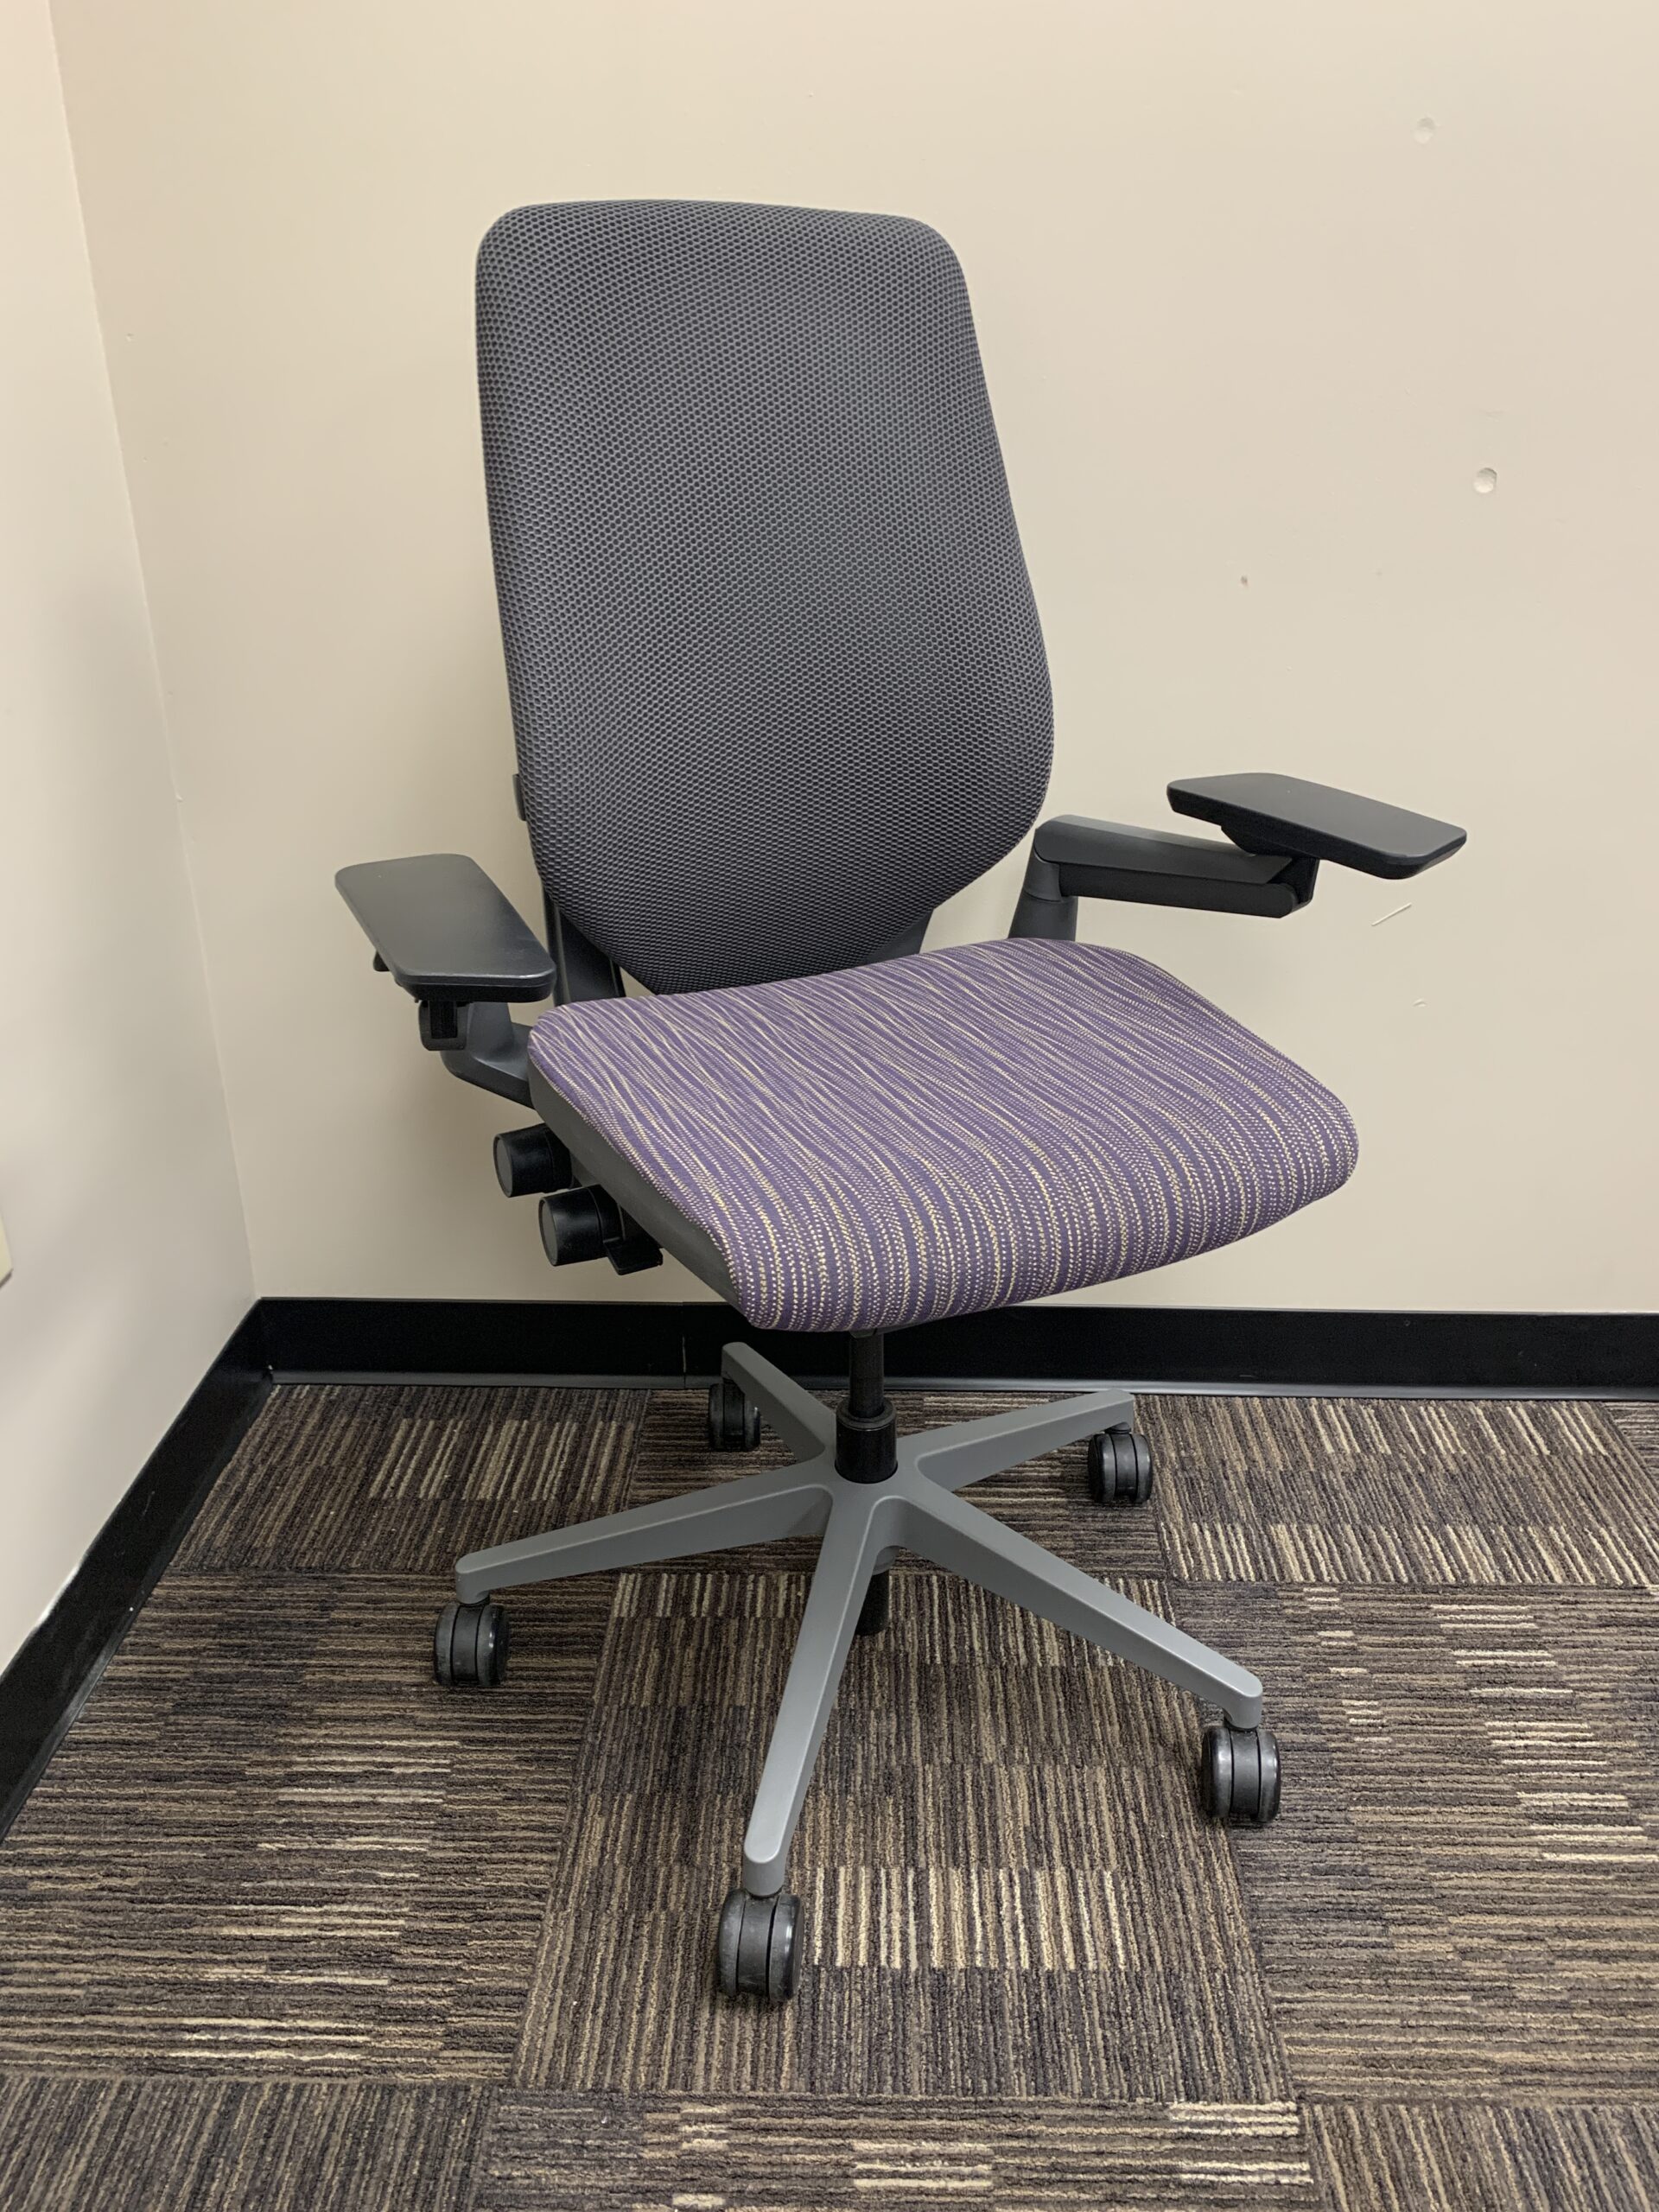 https://ofr-inc.com/wp-content/uploads/2022/07/1734-Steelcase-Gesture-Chair-scaled.jpg